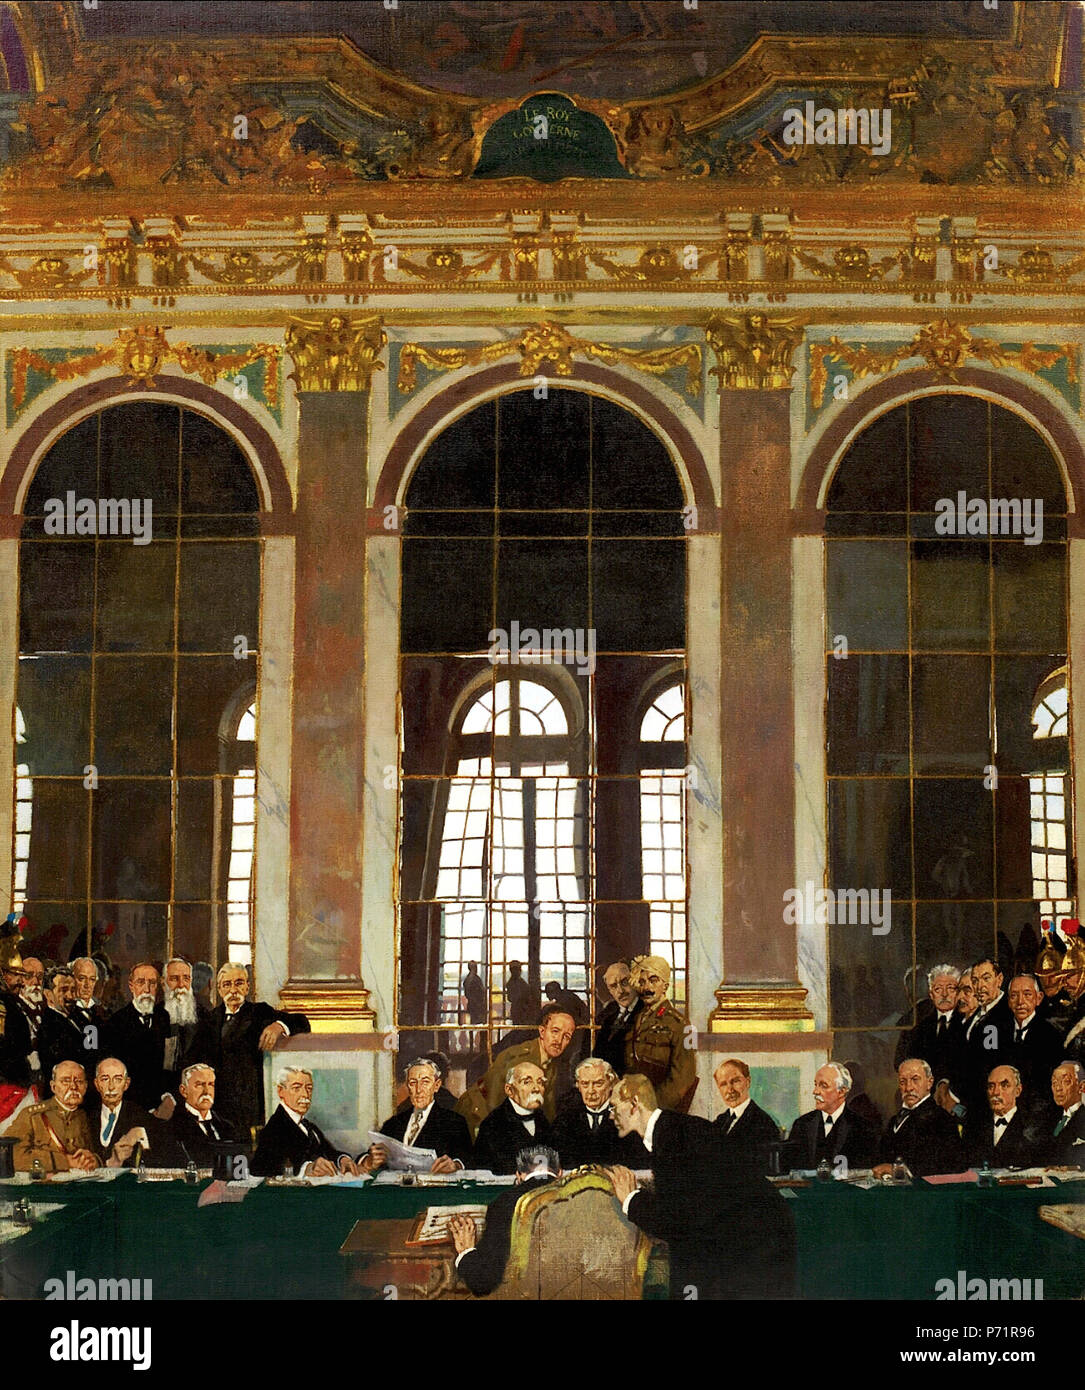 . The Signing of Peace in the Hall of Mirrors, Versailles, 28th June 1919 .  A view of the interior of the Hall of Mirrors at Versailles, with the heads of state sitting and standing before a long table. Front Row: Dr Johannes Bell (Germany) signing with Herr Hermann Muller leaning over him. Middle row (seated, left to right): General Tasker H Bliss, Col E M House, Mr Henry White, Mr Robert Lansing, President Woodrow Wilson (United States); M Georges Clemenceau (France); Mr D Lloyd George, Mr A Bonar Law, Mr Arthur J Balfour, Viscount Milner, Mr G N Barnes (Great Britain); The Marquis Saionzi  Stock Photo